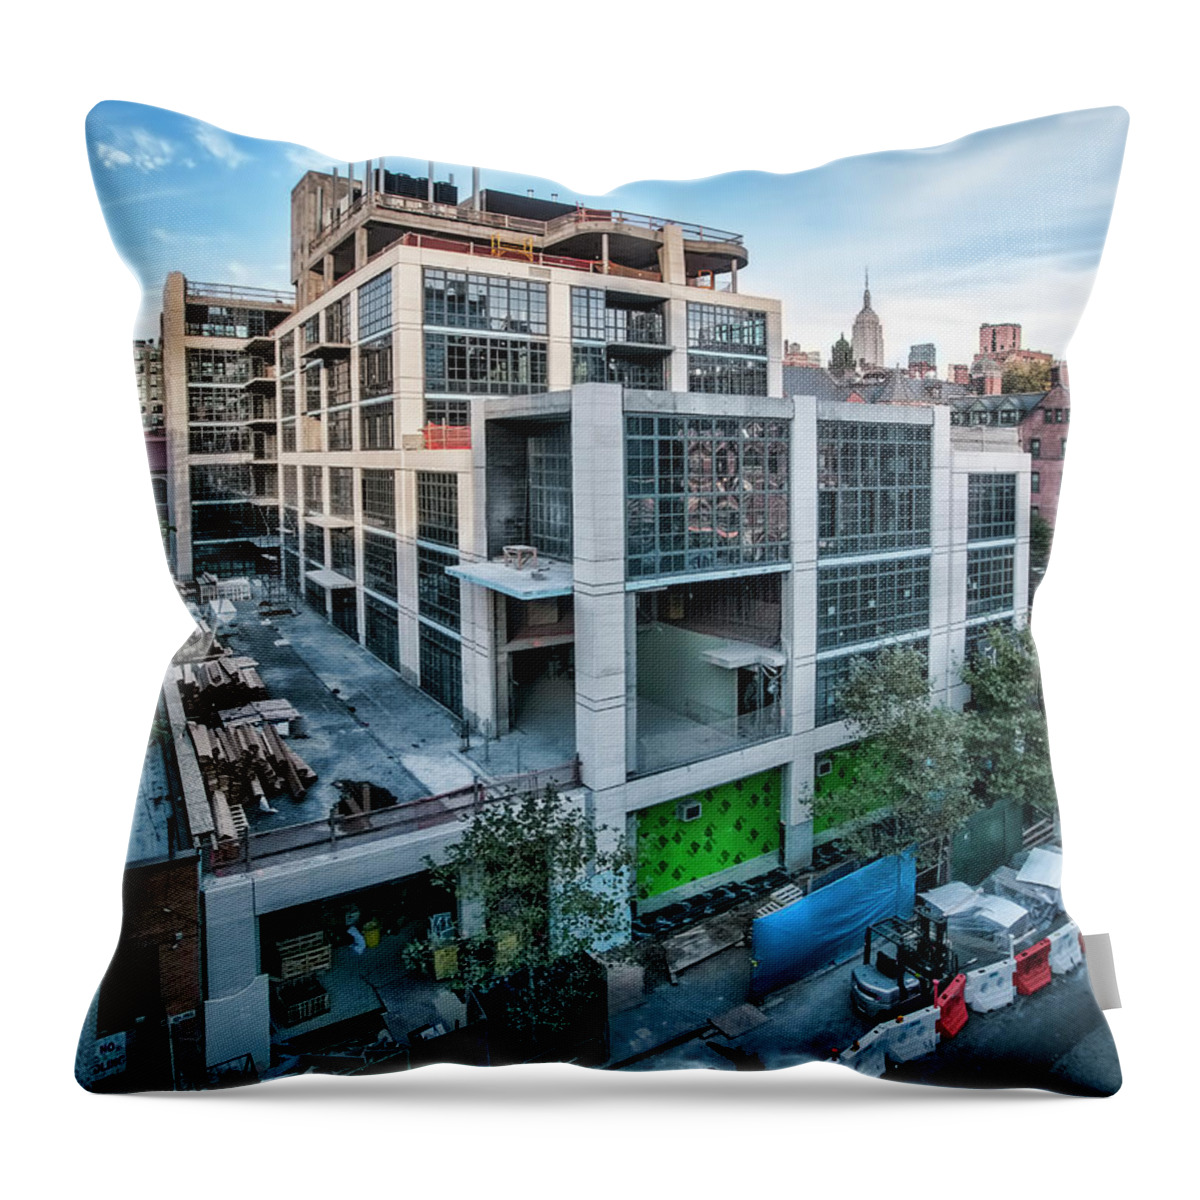  Throw Pillow featuring the photograph 500 W21st Oct2014 by Steve Sahm